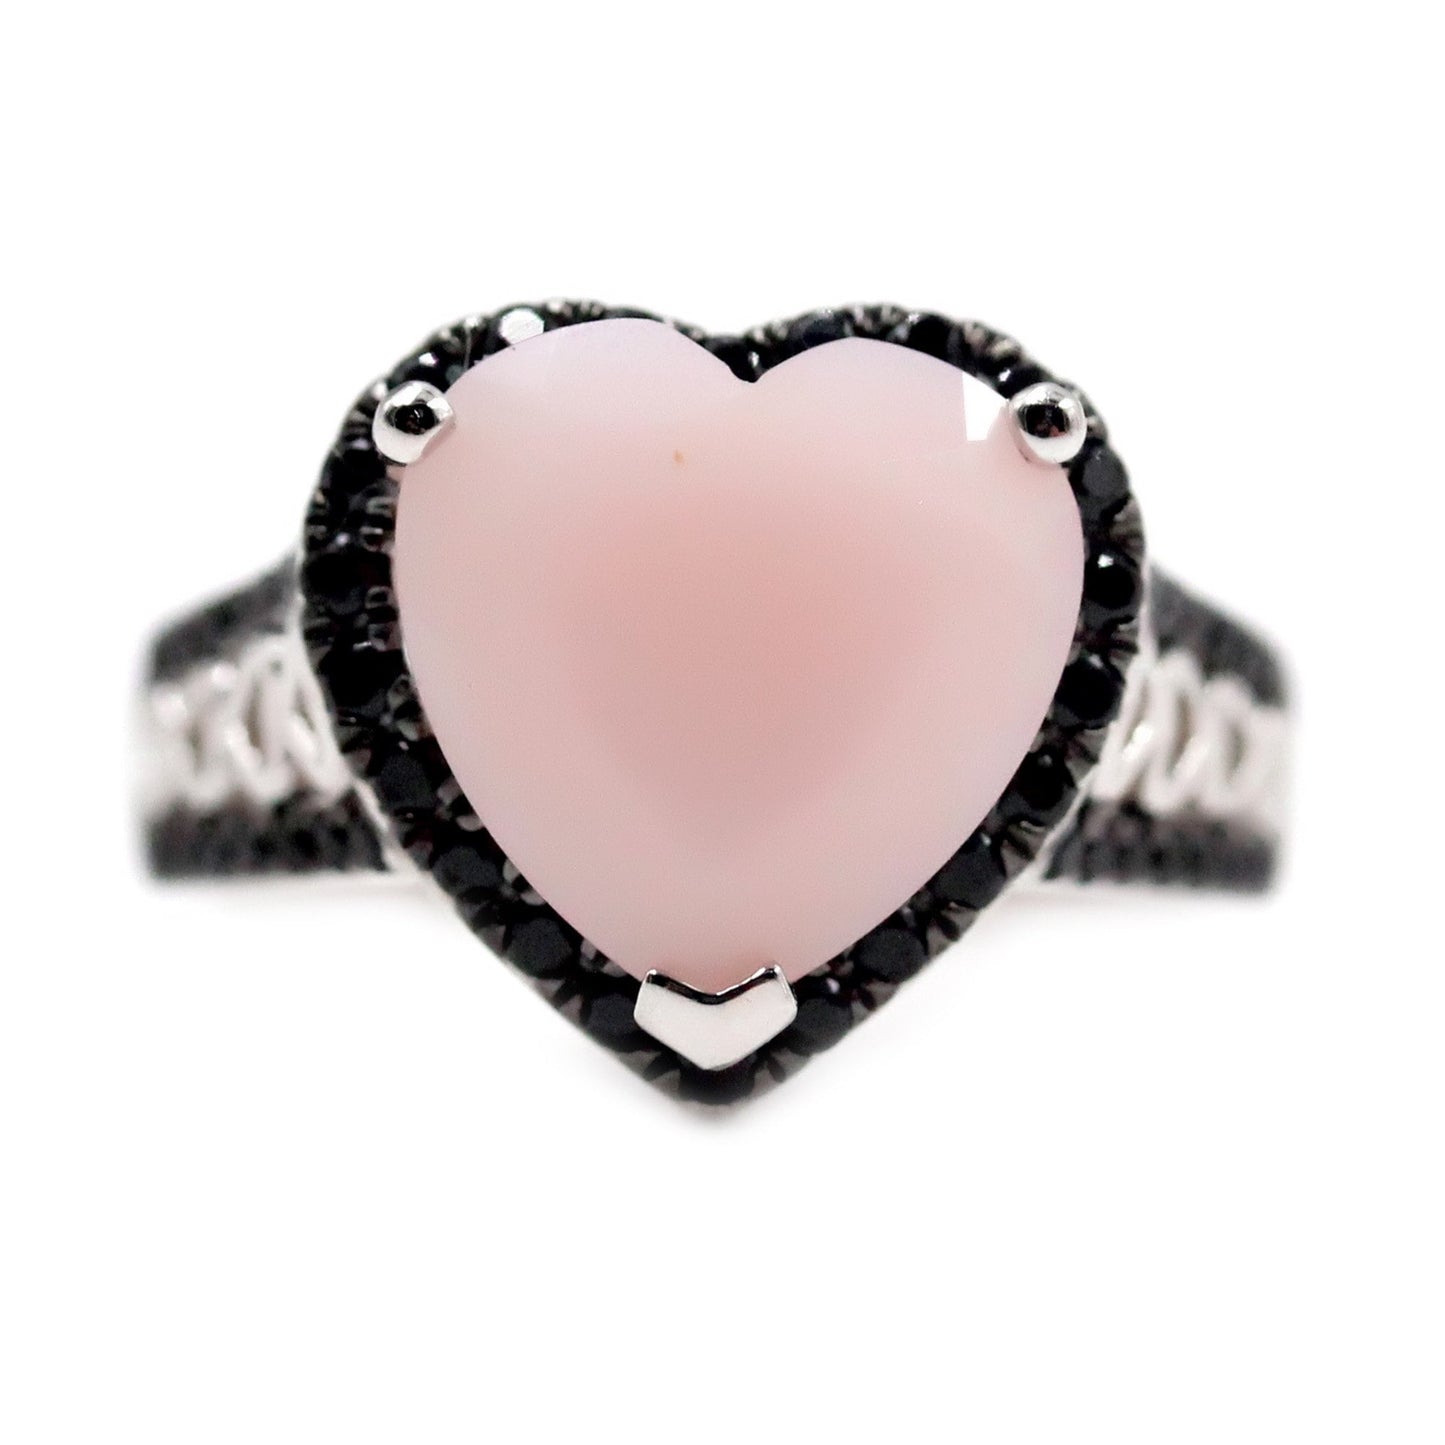 Pink Opal Heart Ring, 925 Sterling Silver Ring, Engagement Ring, Birthstone Ring-Gemstone Jewelry Anniversary Gift-Gift For Her